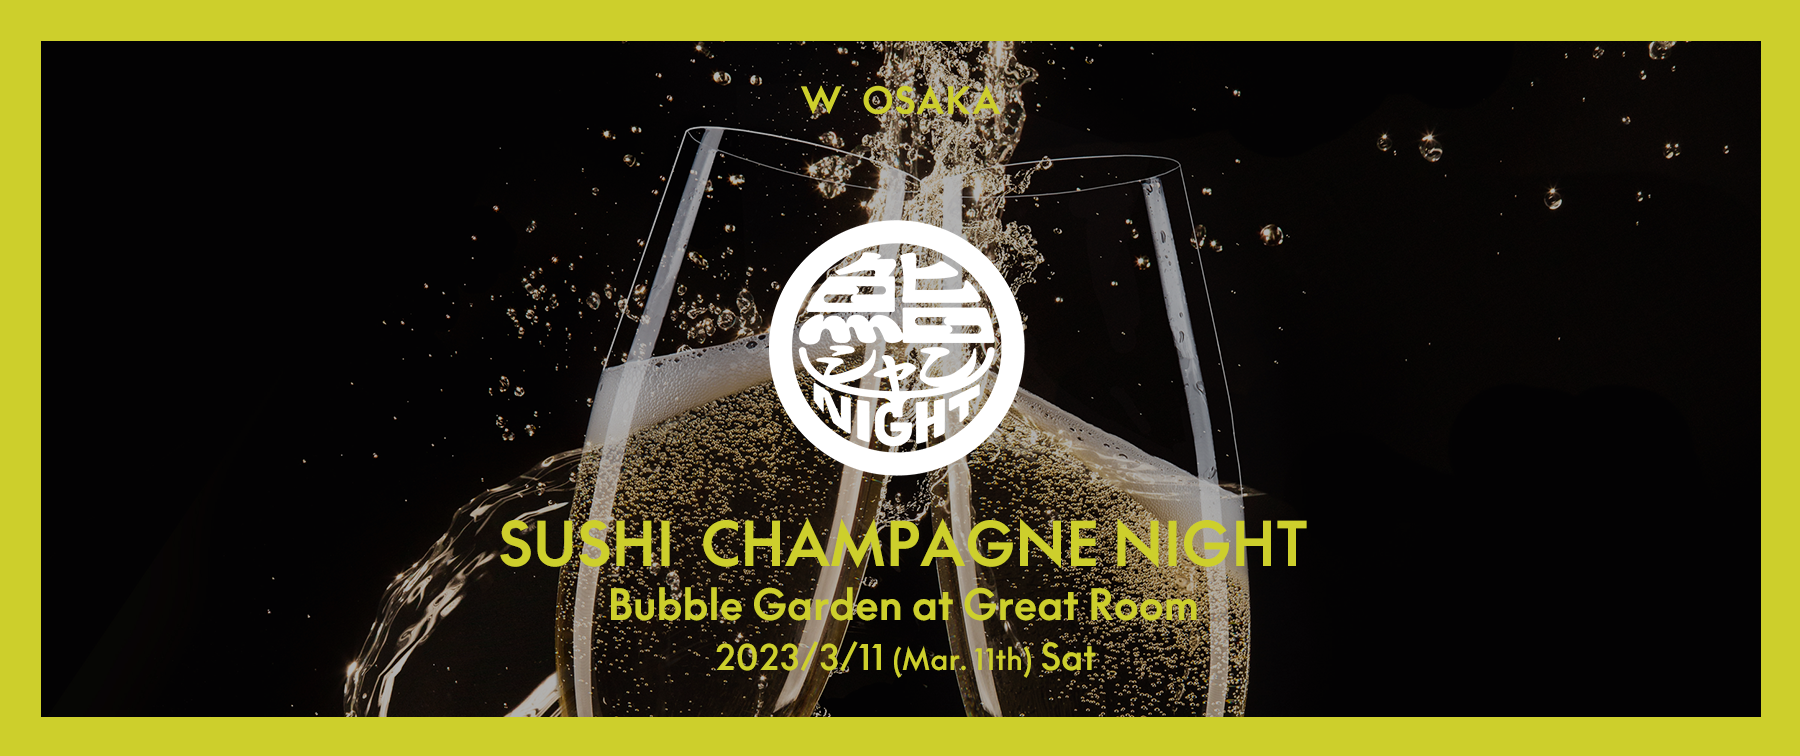 【Acceptance of applications closed】SUSHI CHAMPAGNE NIGHT (Bubble Garden)'s images1